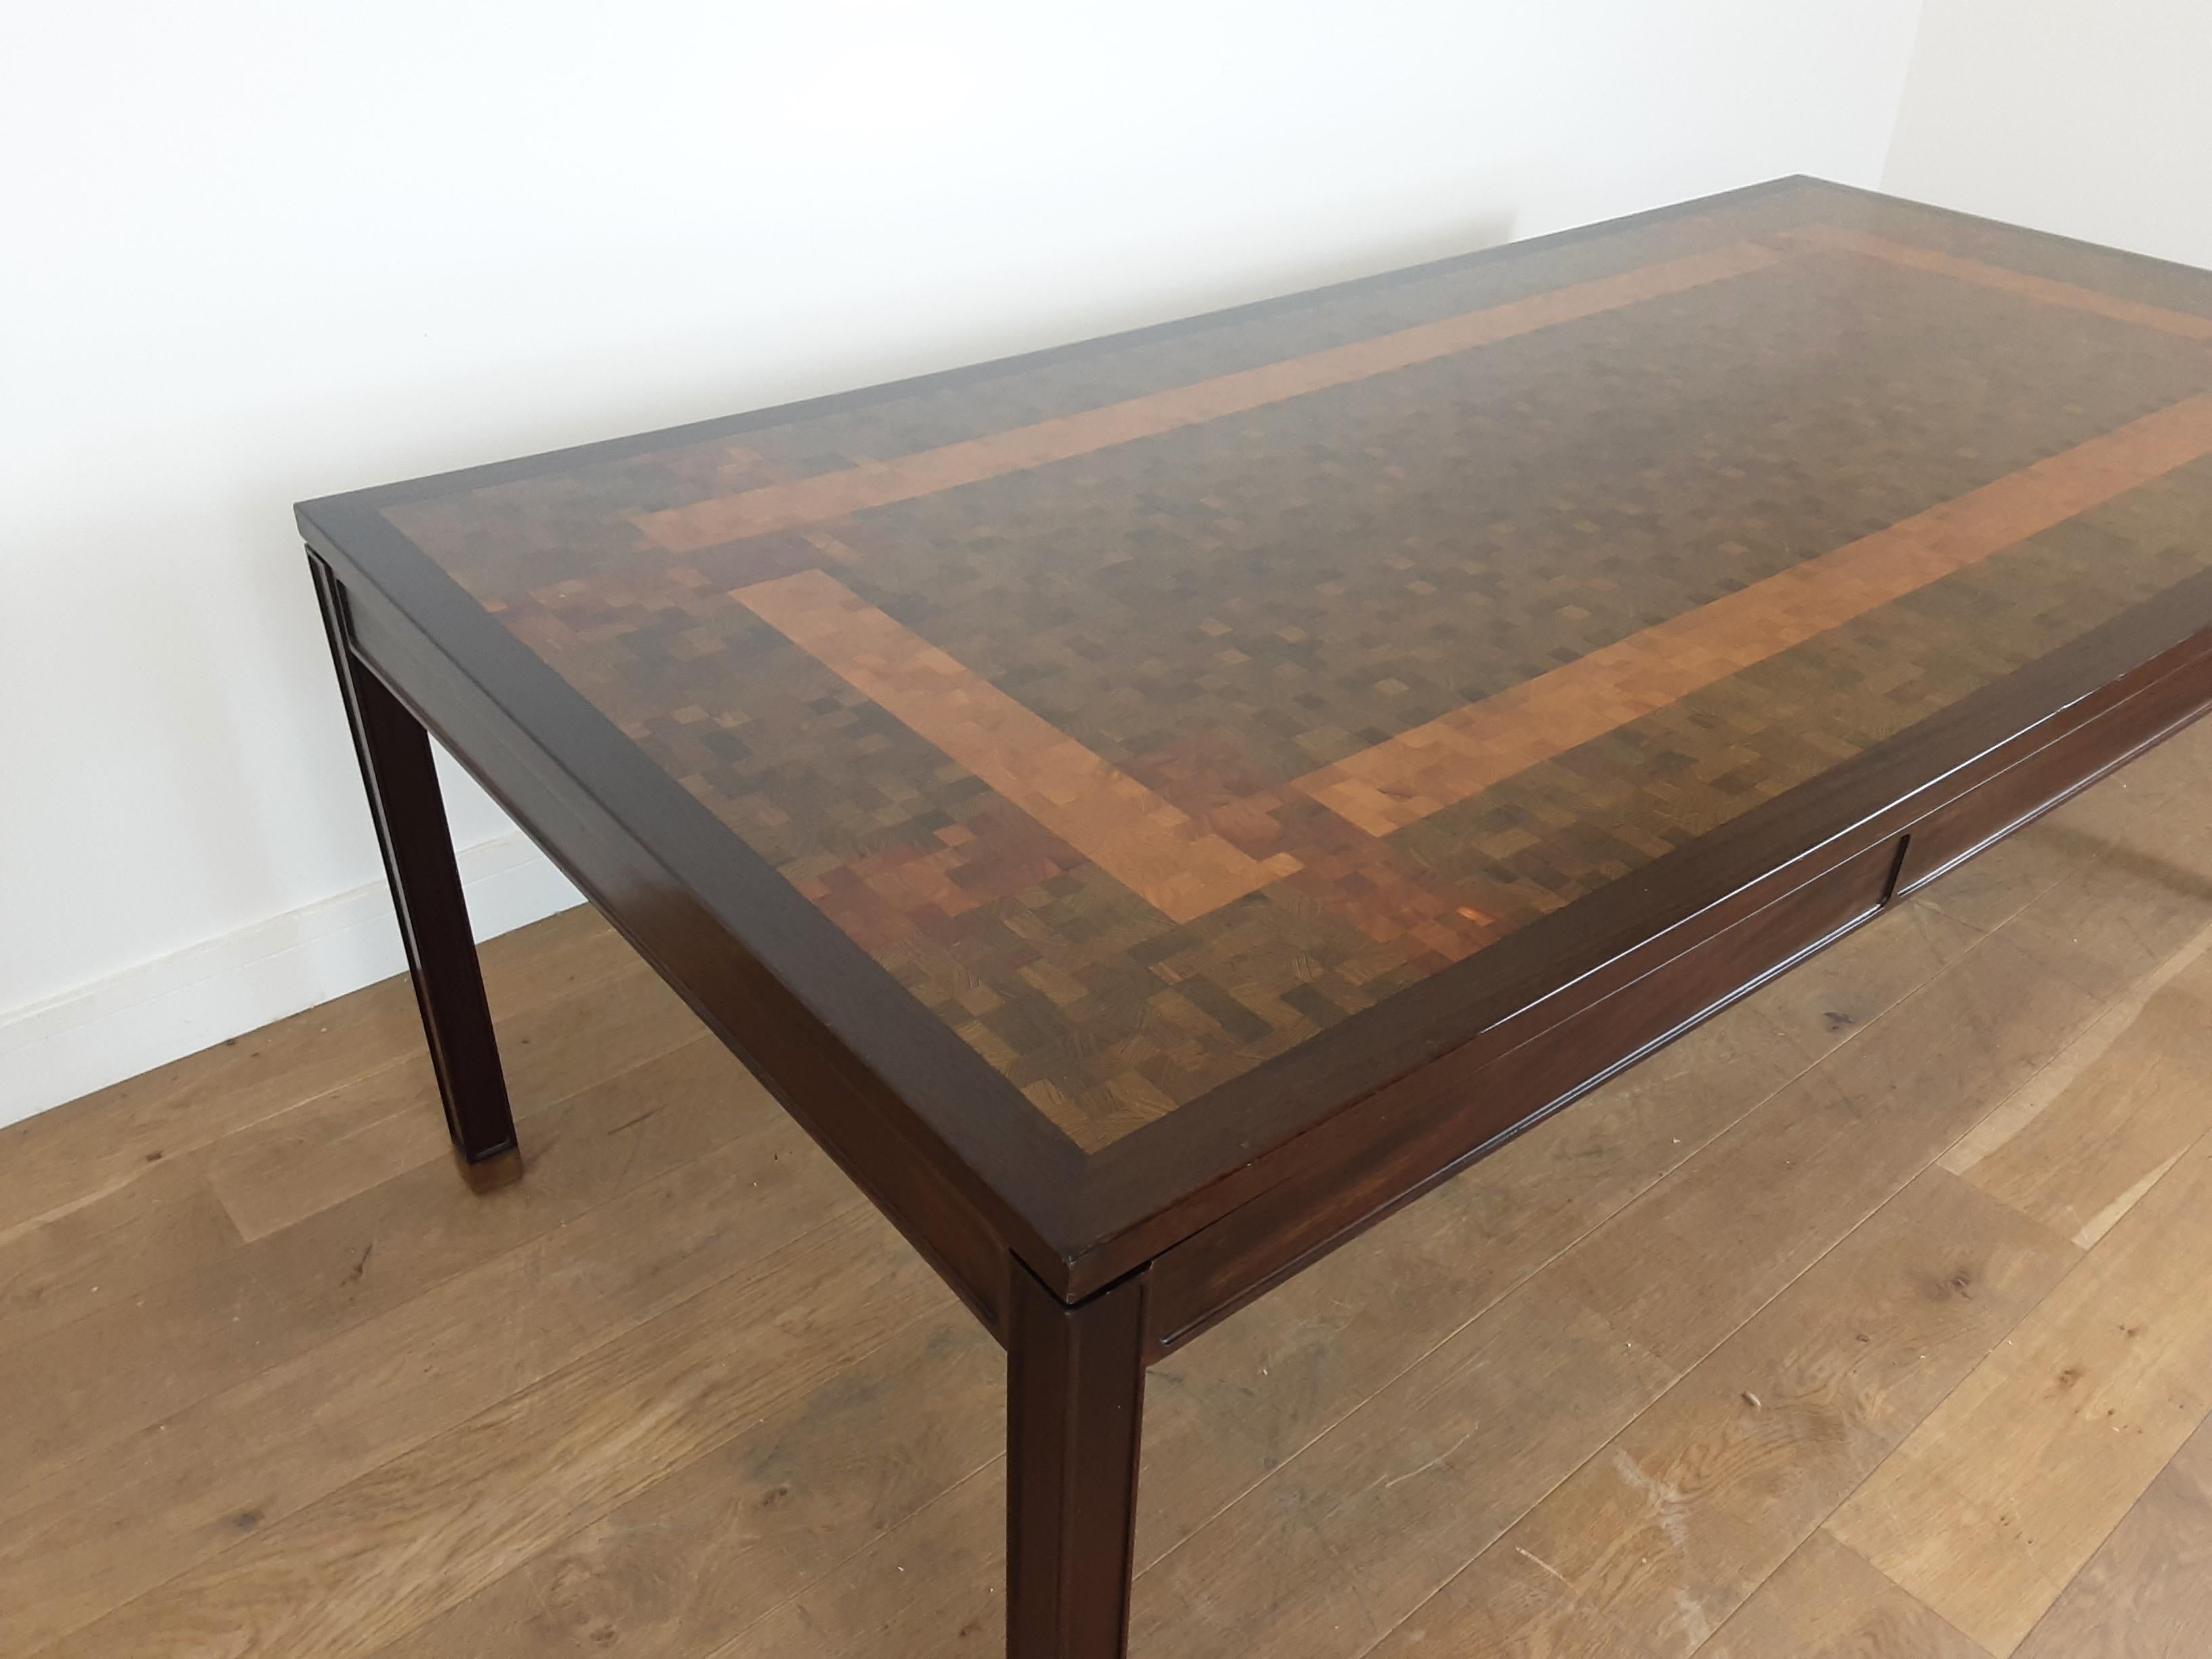 Large Midcentury Dining Table Designed by Gorm Lindum with Mosaic Design For Sale 3